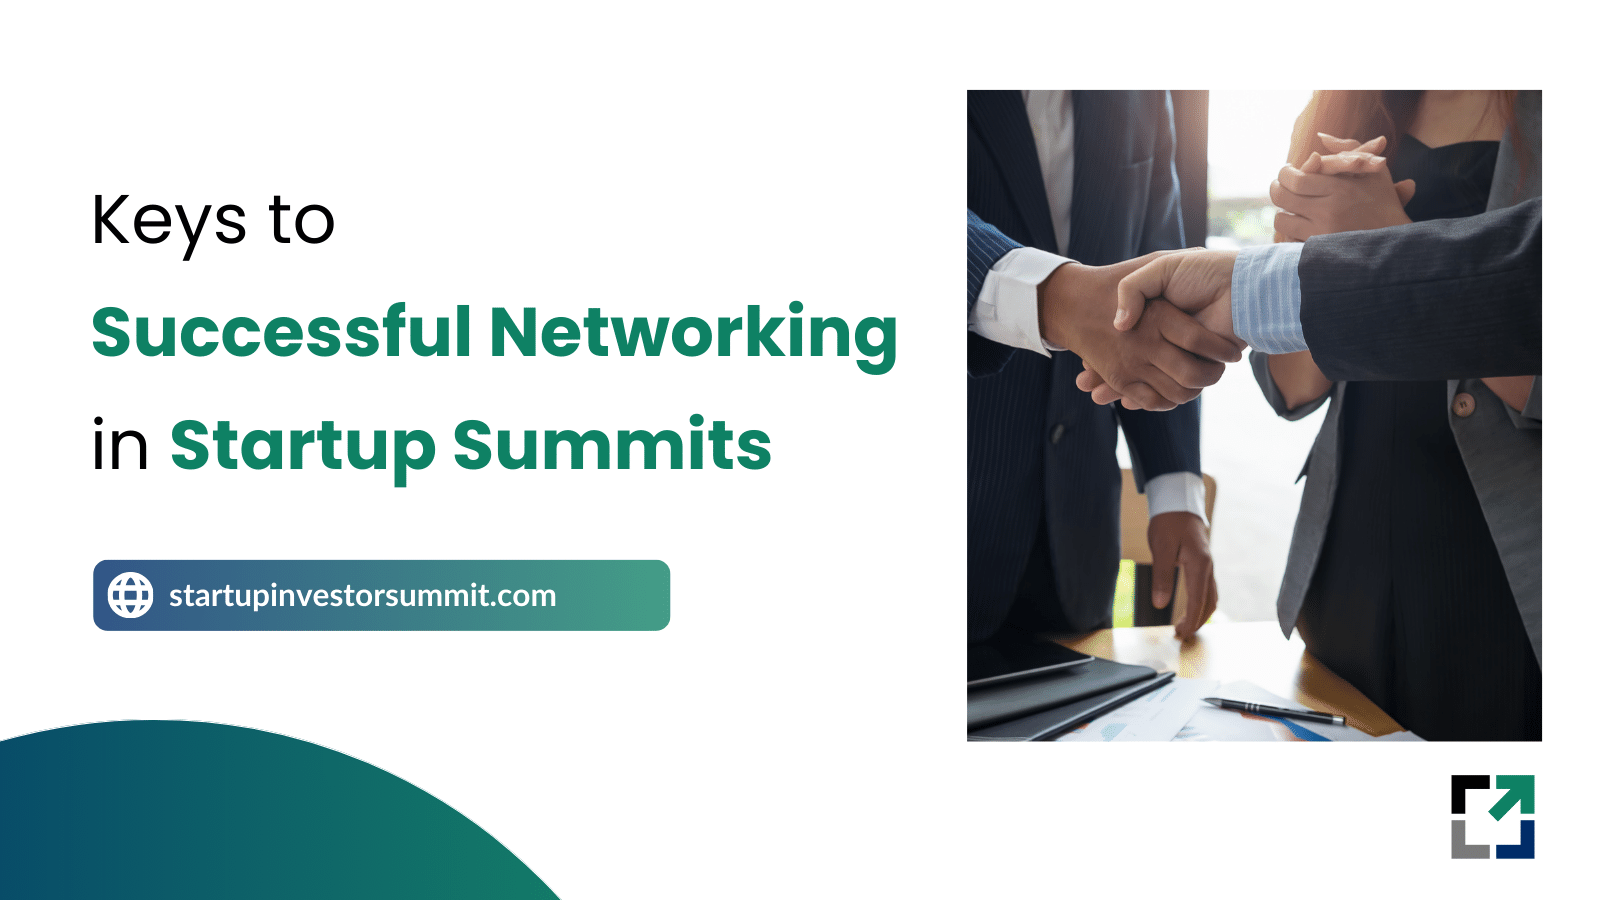 Keys to Successful Networking in Startup Summits